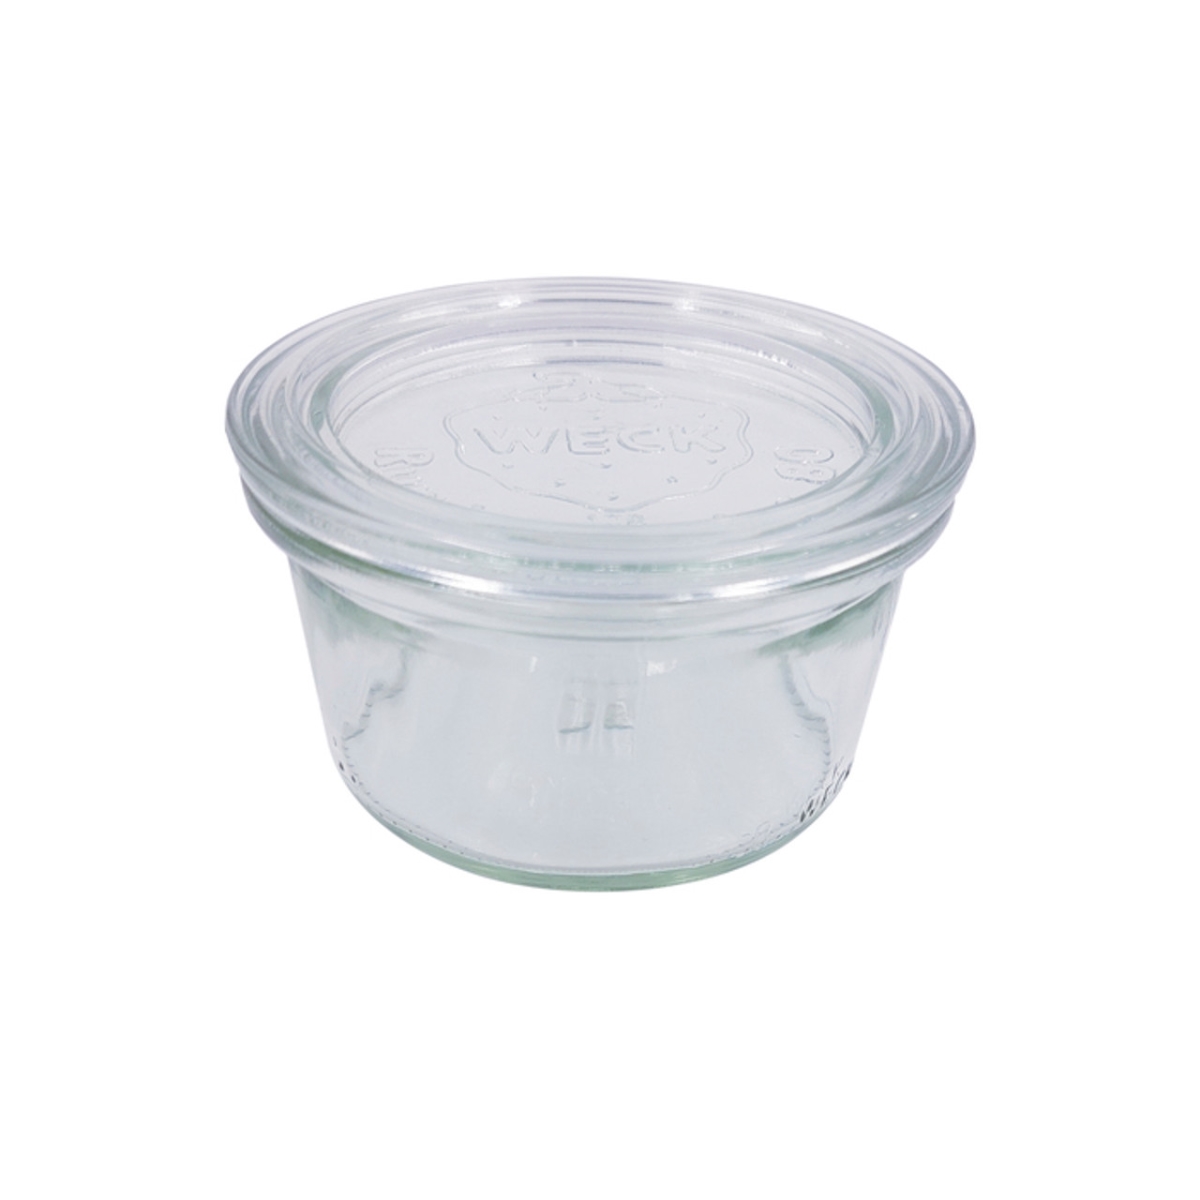 Picture of Packnwood 294WEK976 3.14 Dia. x 1.96 in. 5.5 oz Bokocook Reusable Weck Glass Jar with Glass Lid - 12 Piece